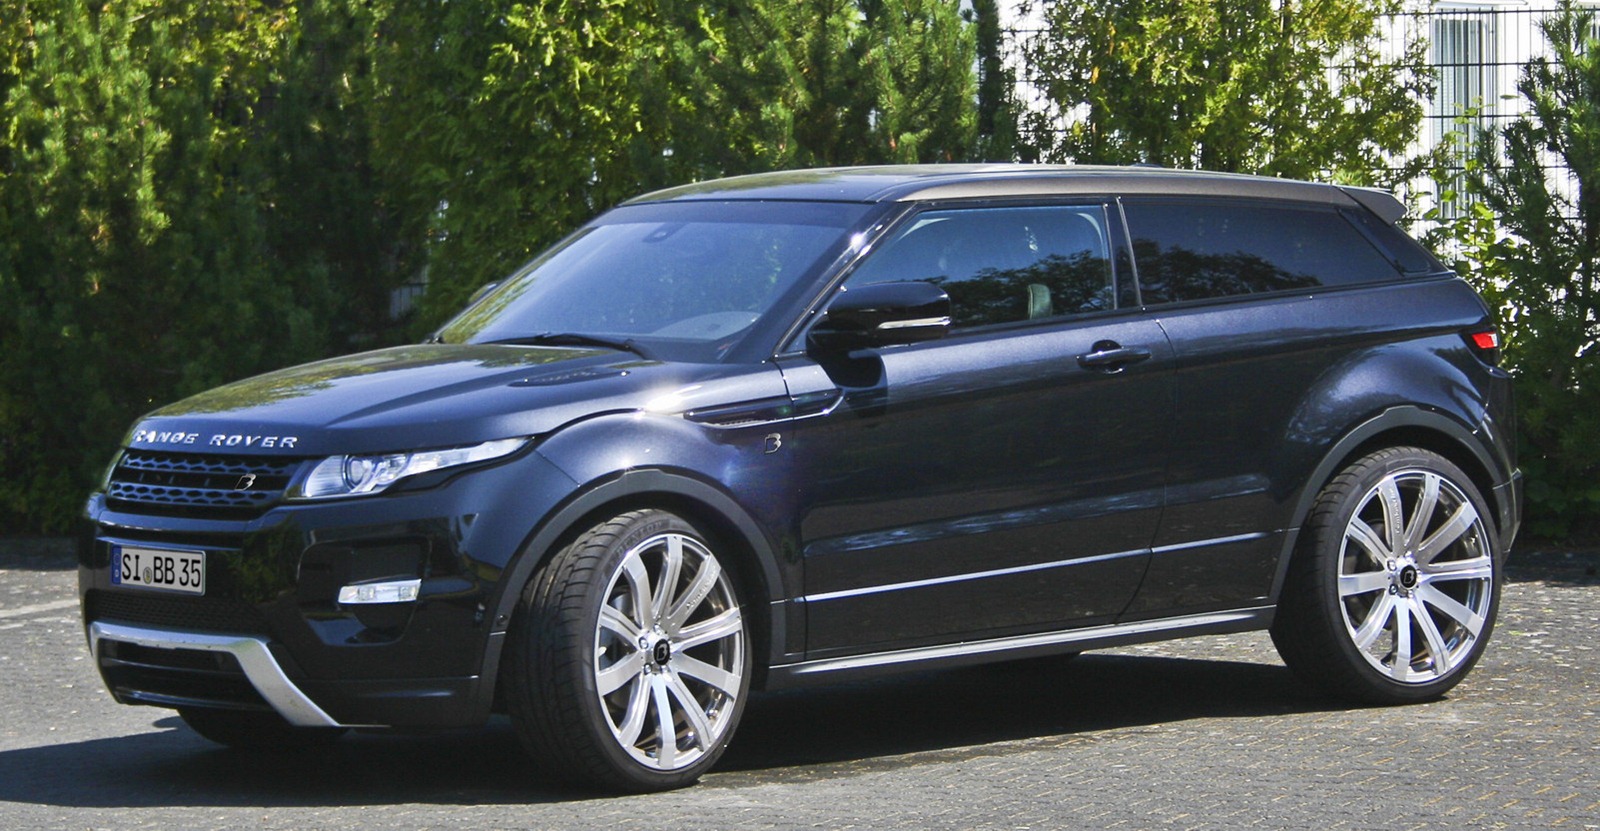 Range Rover Evoque gets power boost from B&B